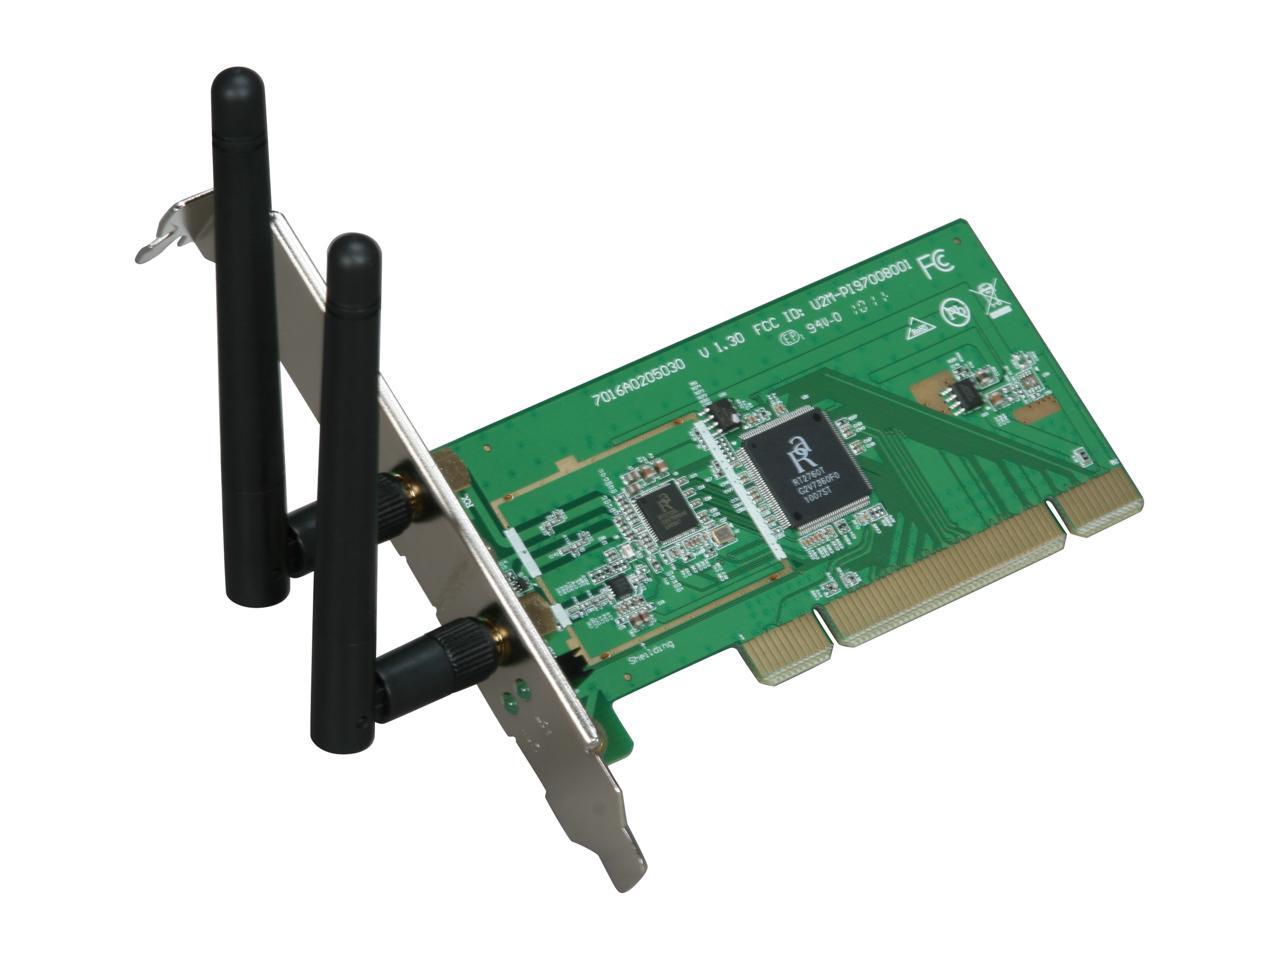 rosewill 802.11n usb wifi adapter driver